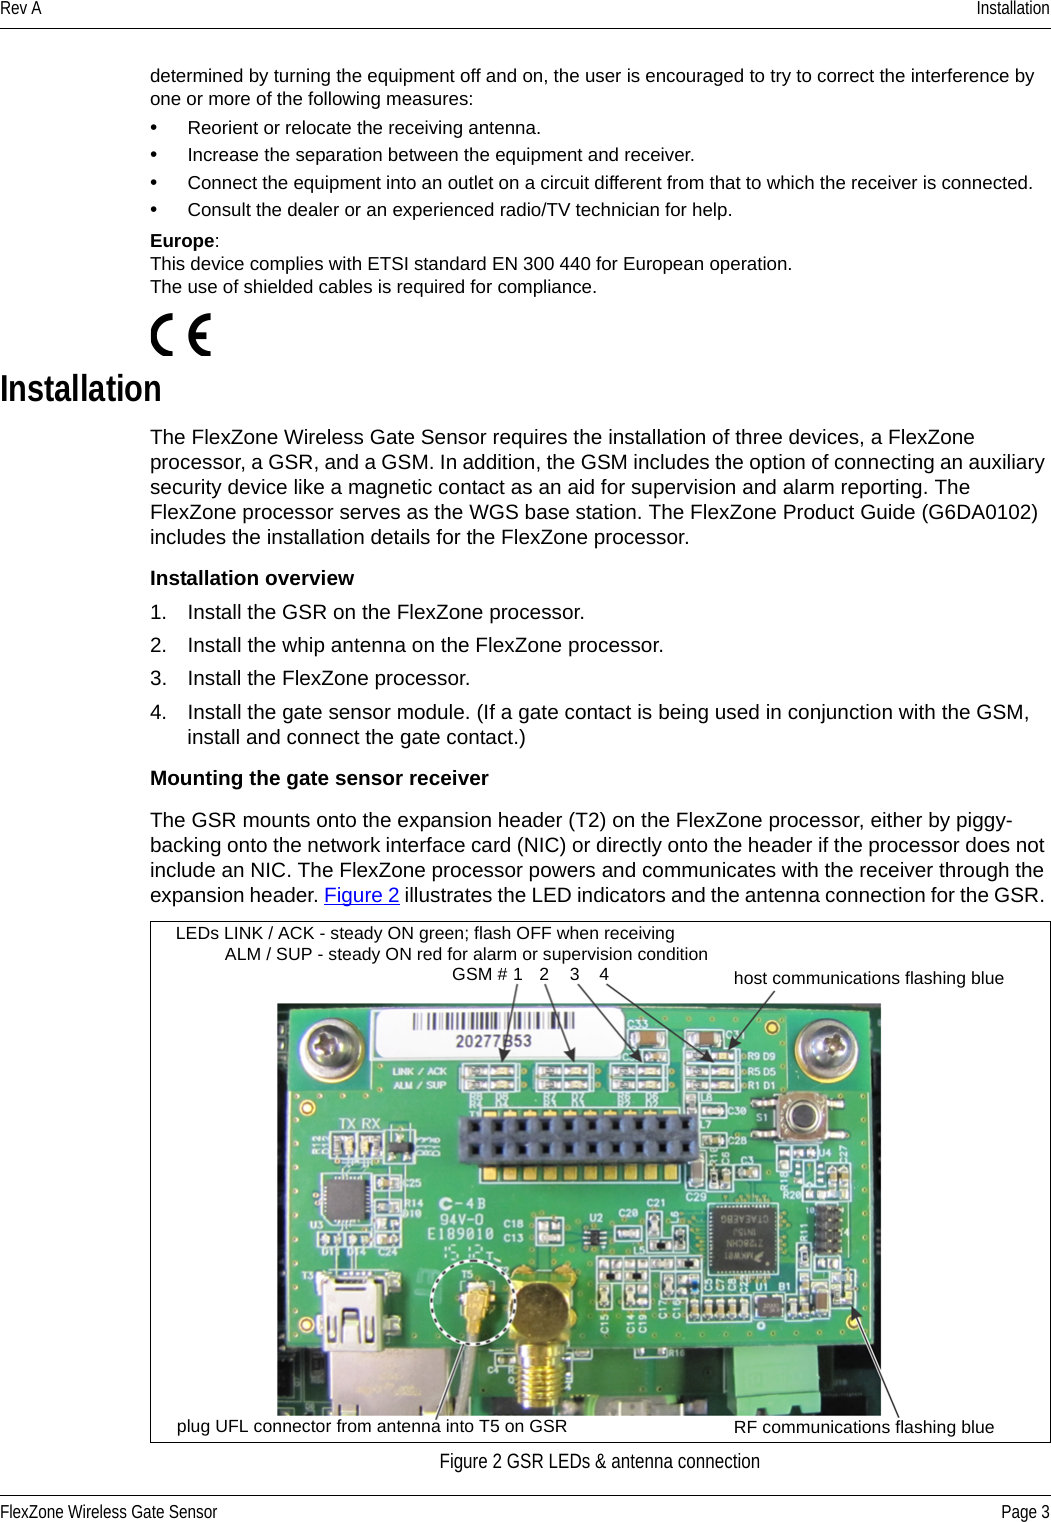 Rev A InstallationFlexZone Wireless Gate Sensor Page 3determined by turning the equipment off and on, the user is encouraged to try to correct the interference by one or more of the following measures:•Reorient or relocate the receiving antenna.•Increase the separation between the equipment and receiver.•Connect the equipment into an outlet on a circuit different from that to which the receiver is connected.•Consult the dealer or an experienced radio/TV technician for help.Europe: This device complies with ETSI standard EN 300 440 for European operation.The use of shielded cables is required for compliance. InstallationThe FlexZone Wireless Gate Sensor requires the installation of three devices, a FlexZone processor, a GSR, and a GSM. In addition, the GSM includes the option of connecting an auxiliary security device like a magnetic contact as an aid for supervision and alarm reporting. The FlexZone processor serves as the WGS base station. The FlexZone Product Guide (G6DA0102) includes the installation details for the FlexZone processor. Installation overview1. Install the GSR on the FlexZone processor.2. Install the whip antenna on the FlexZone processor.3. Install the FlexZone processor.4. Install the gate sensor module. (If a gate contact is being used in conjunction with the GSM, install and connect the gate contact.)Mounting the gate sensor receiverThe GSR mounts onto the expansion header (T2) on the FlexZone processor, either by piggy-backing onto the network interface card (NIC) or directly onto the header if the processor does not include an NIC. The FlexZone processor powers and communicates with the receiver through the expansion header. Figure 2 illustrates the LED indicators and the antenna connection for the GSR. Figure 2 GSR LEDs &amp; antenna connectionLEDs LINK / ACK - steady ON green; flash OFF when receivingALM / SUP - steady ON red for alarm or supervision conditionGSM # 1 2 3 4 host communications flashing blueplug UFL connector from antenna into T5 on GSR RF communications flashing blue